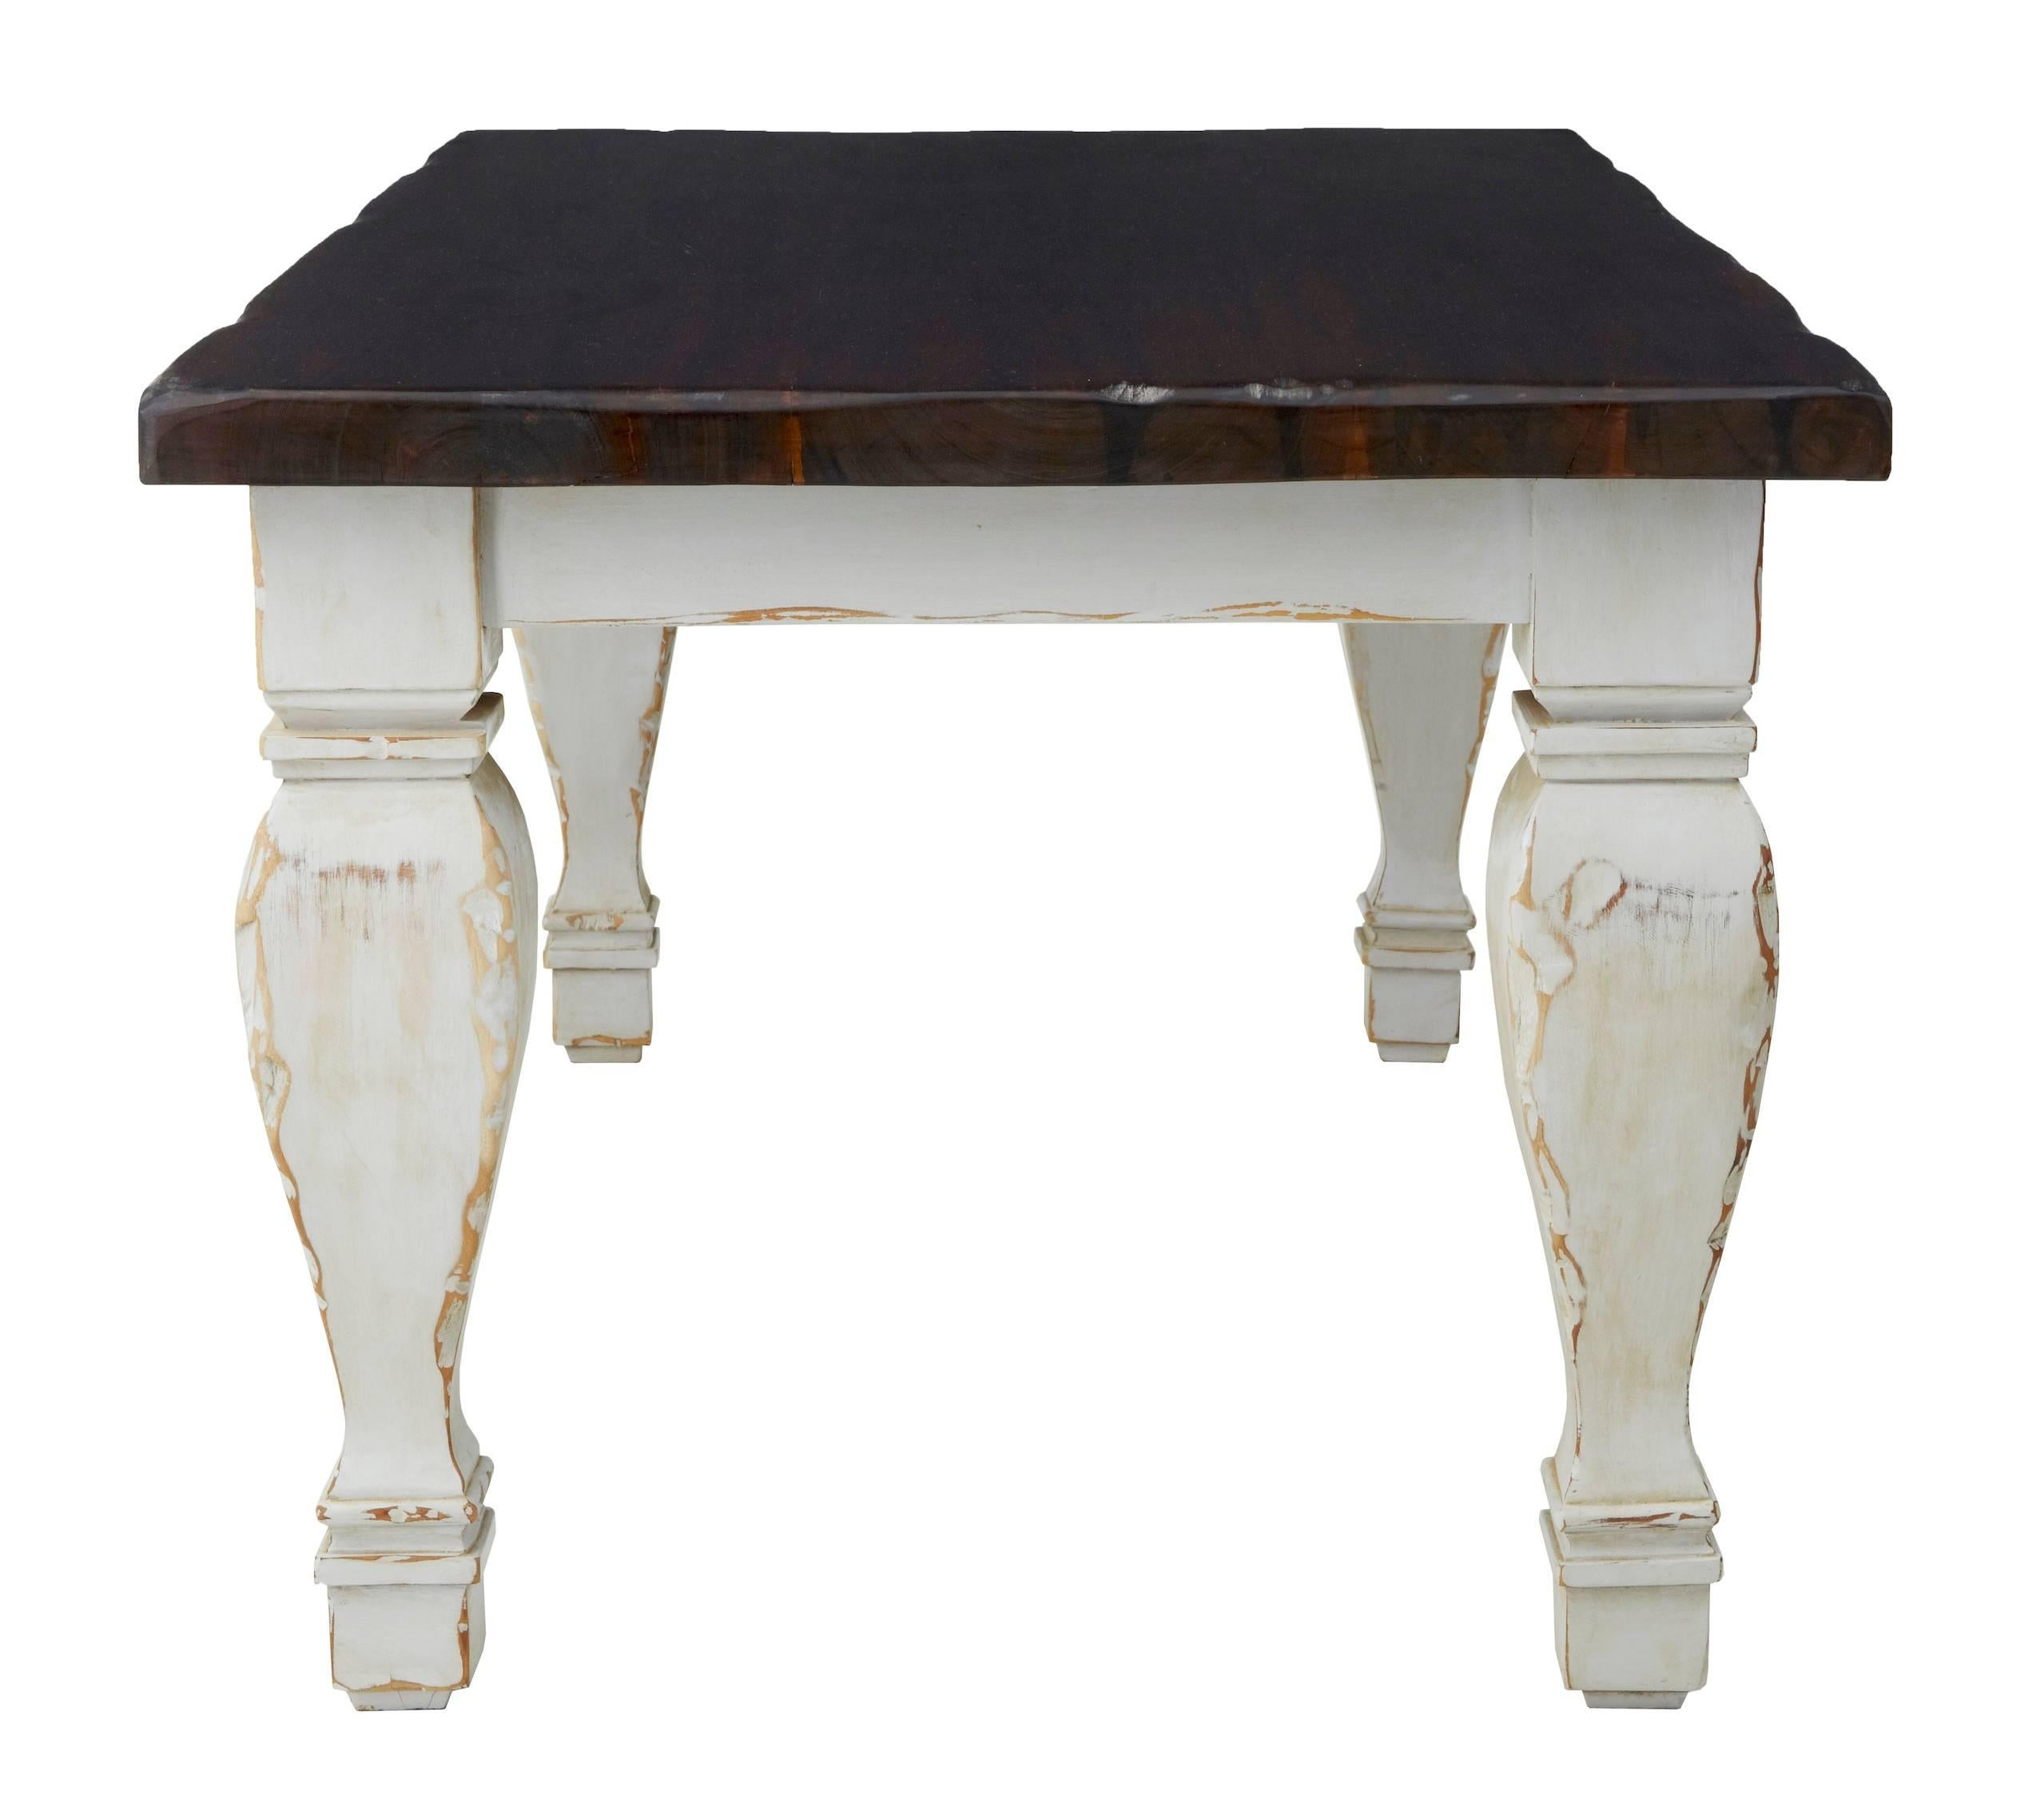 Rustic Large Hardwood Painted Base Dining Table